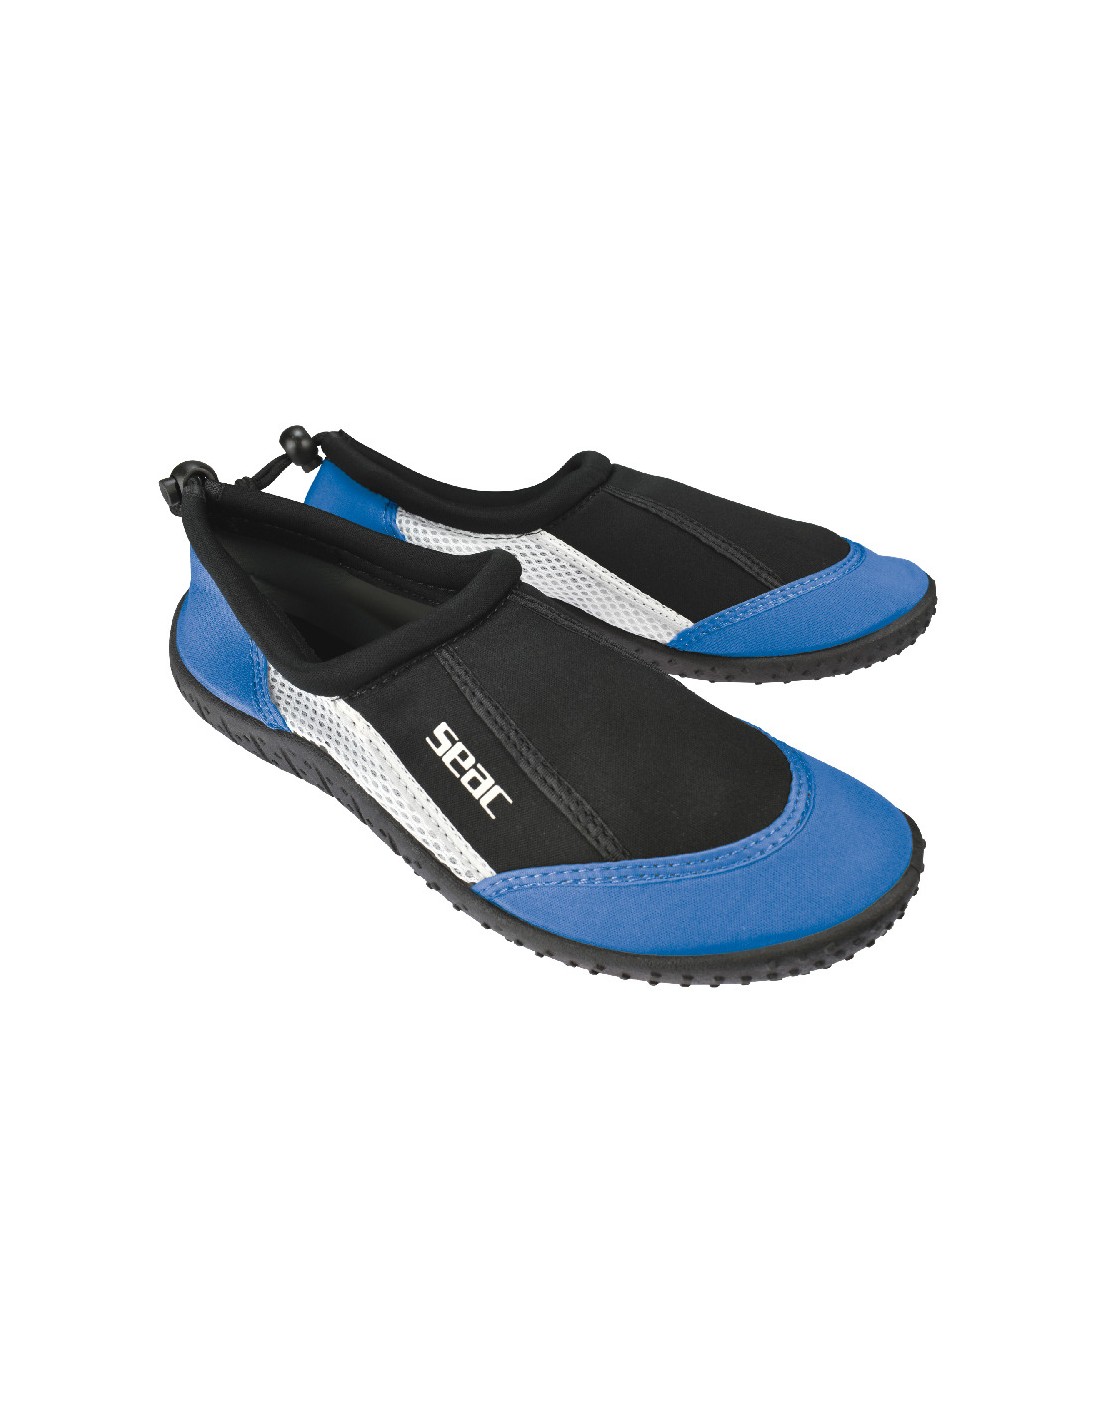 SEAC Reef Beach Shoes - Adults - Blue